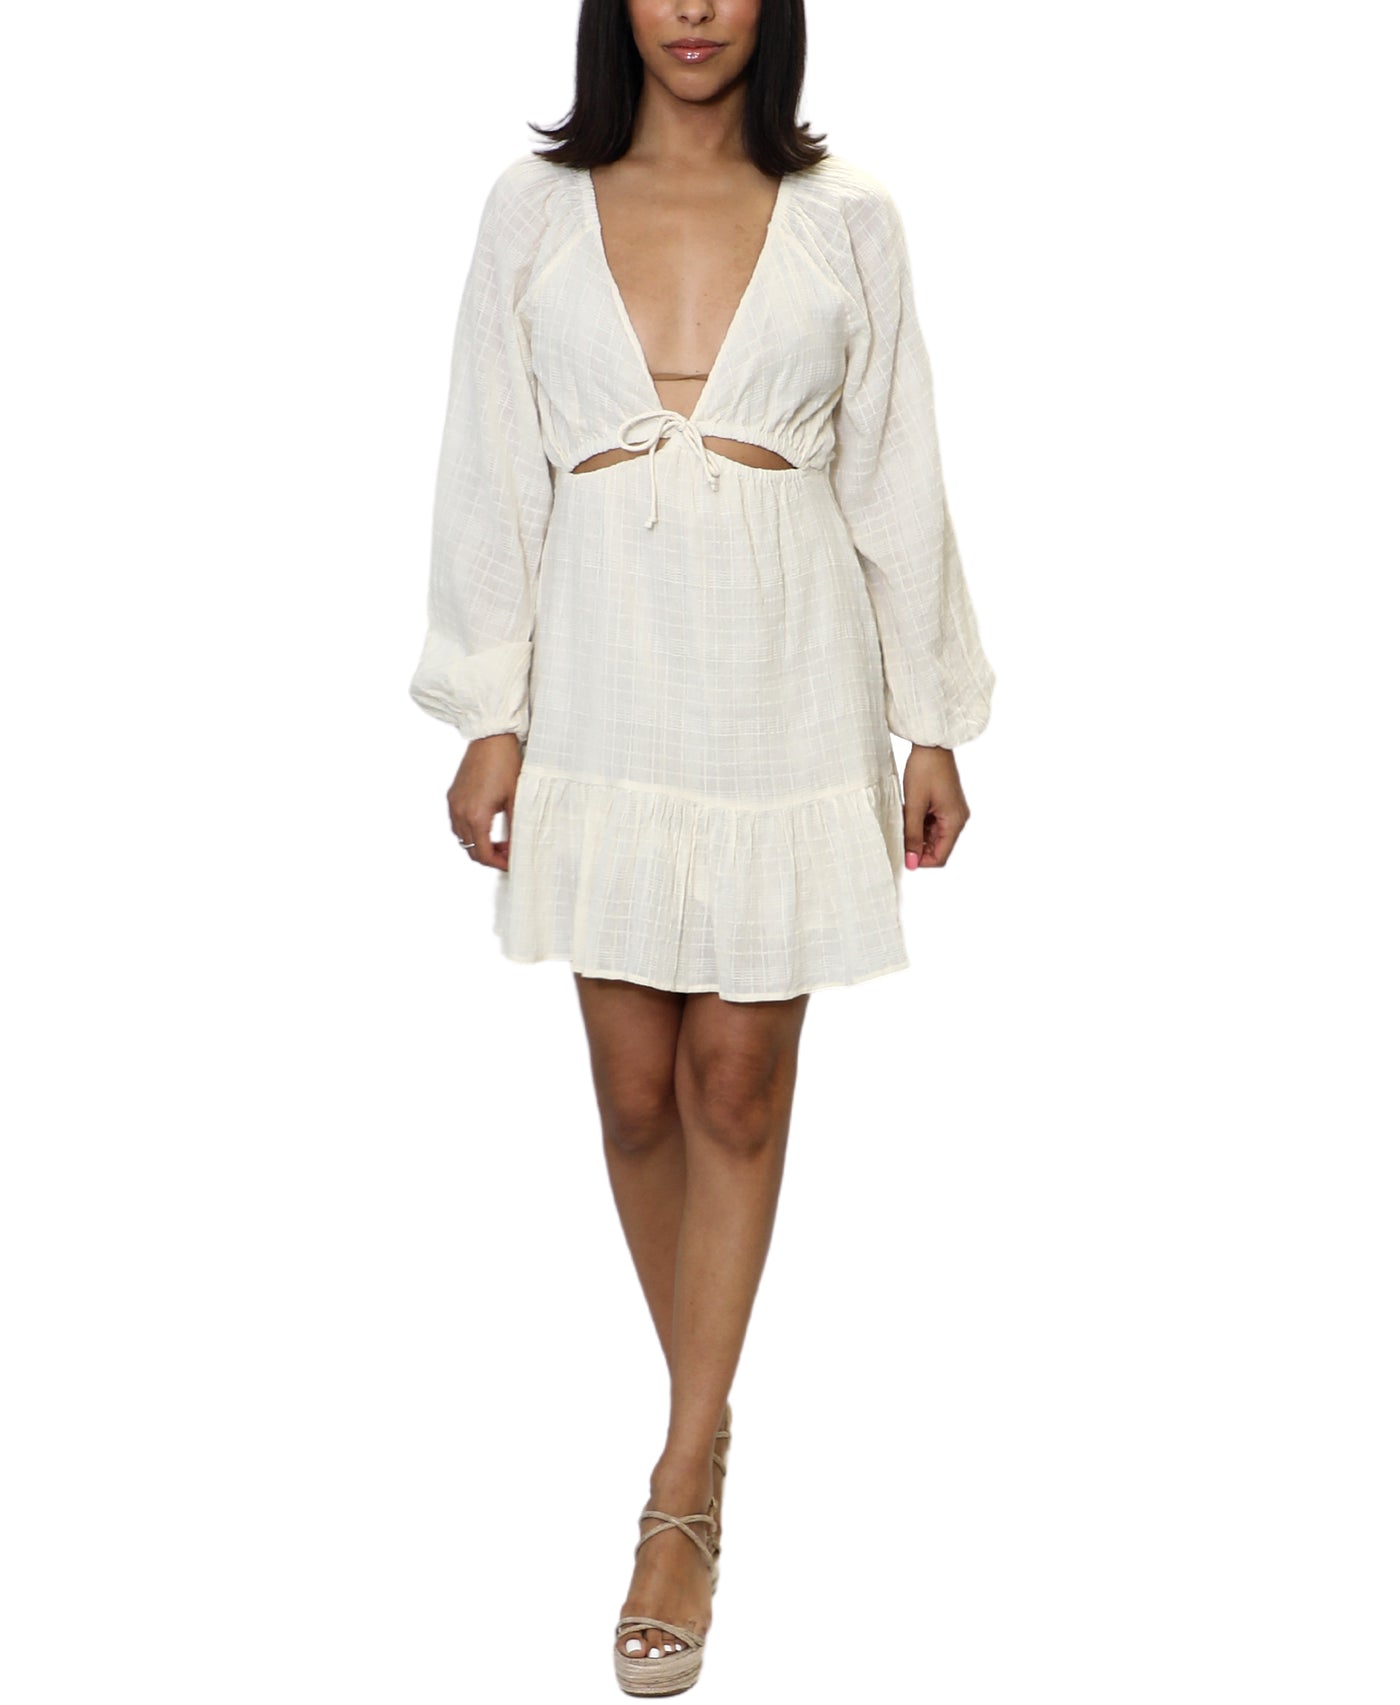 Cut-Out Dress Swim Cover-Up view 1